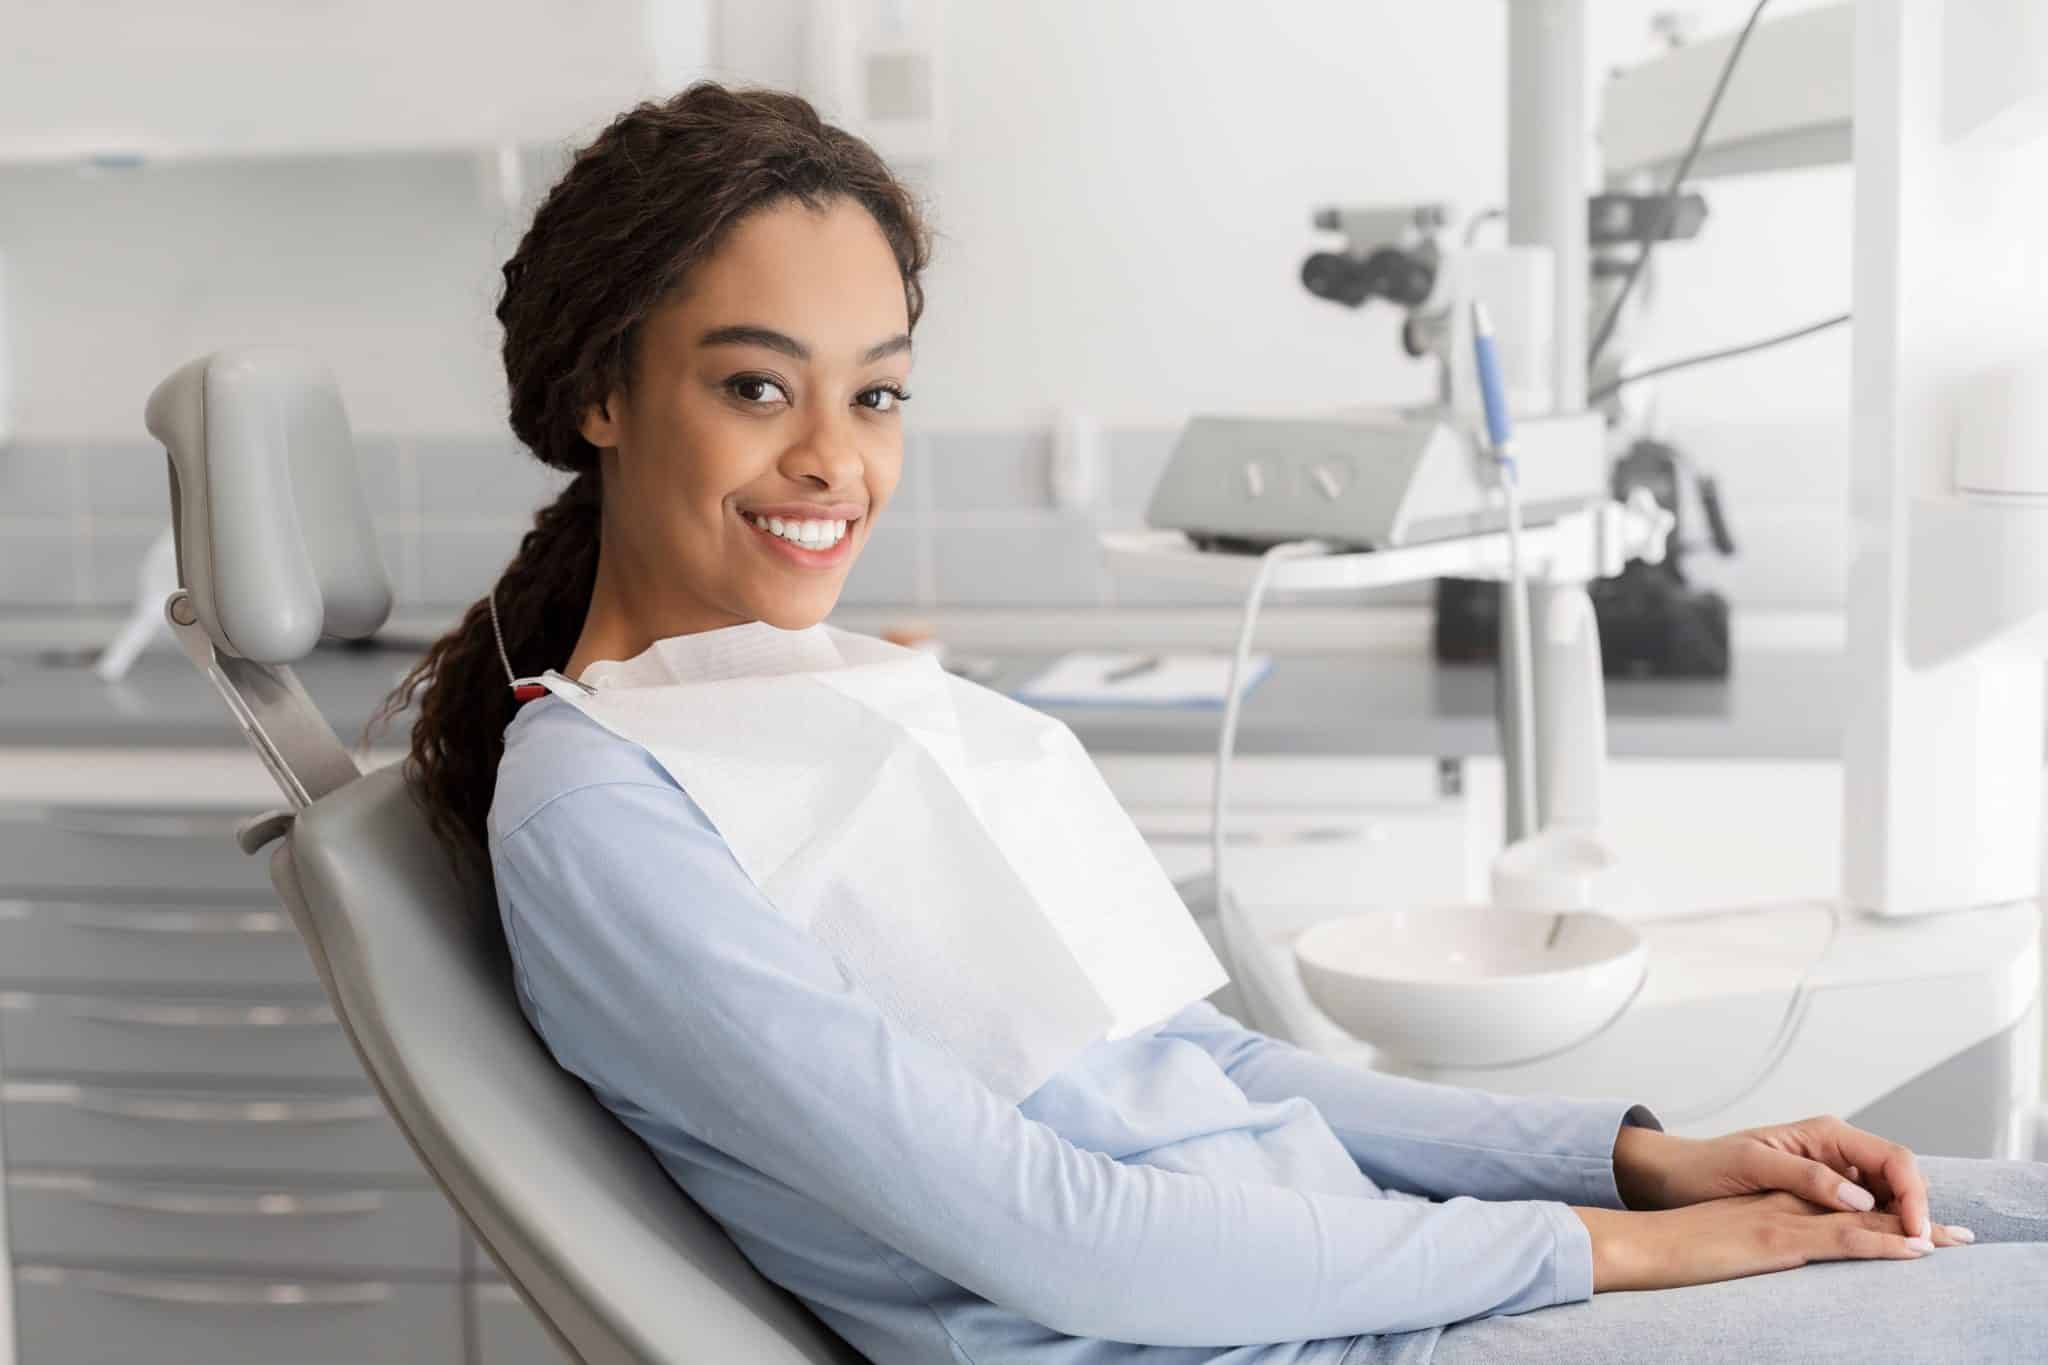 Comprehensive Dental Care Services at The Dentists’ Office in Fallon, Nevada